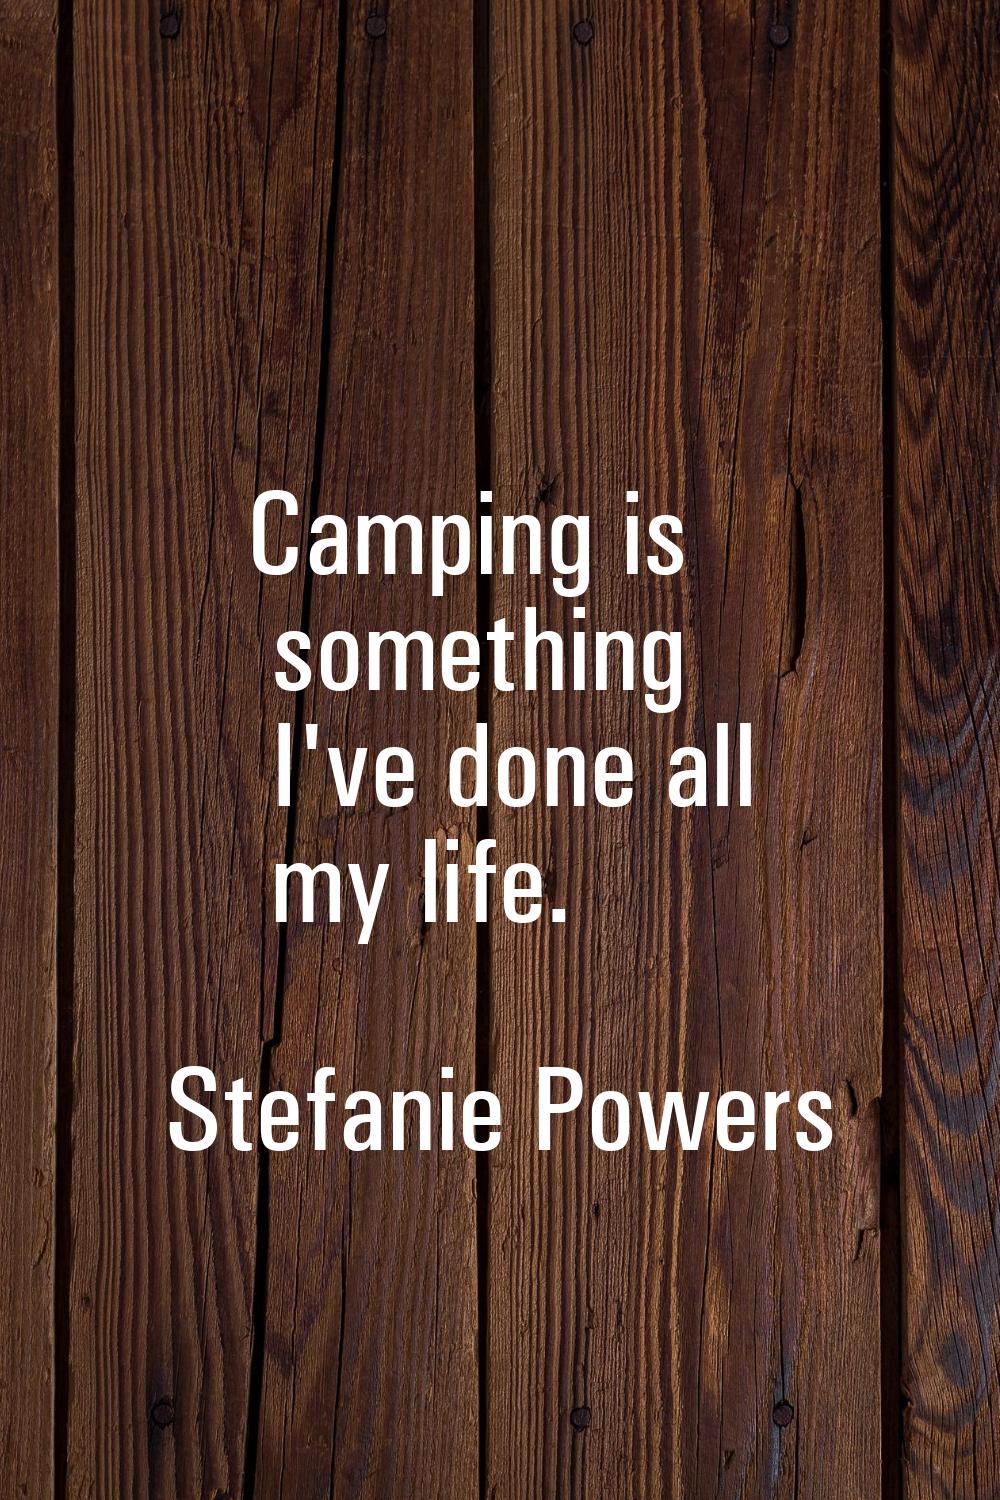 Camping is something I've done all my life.